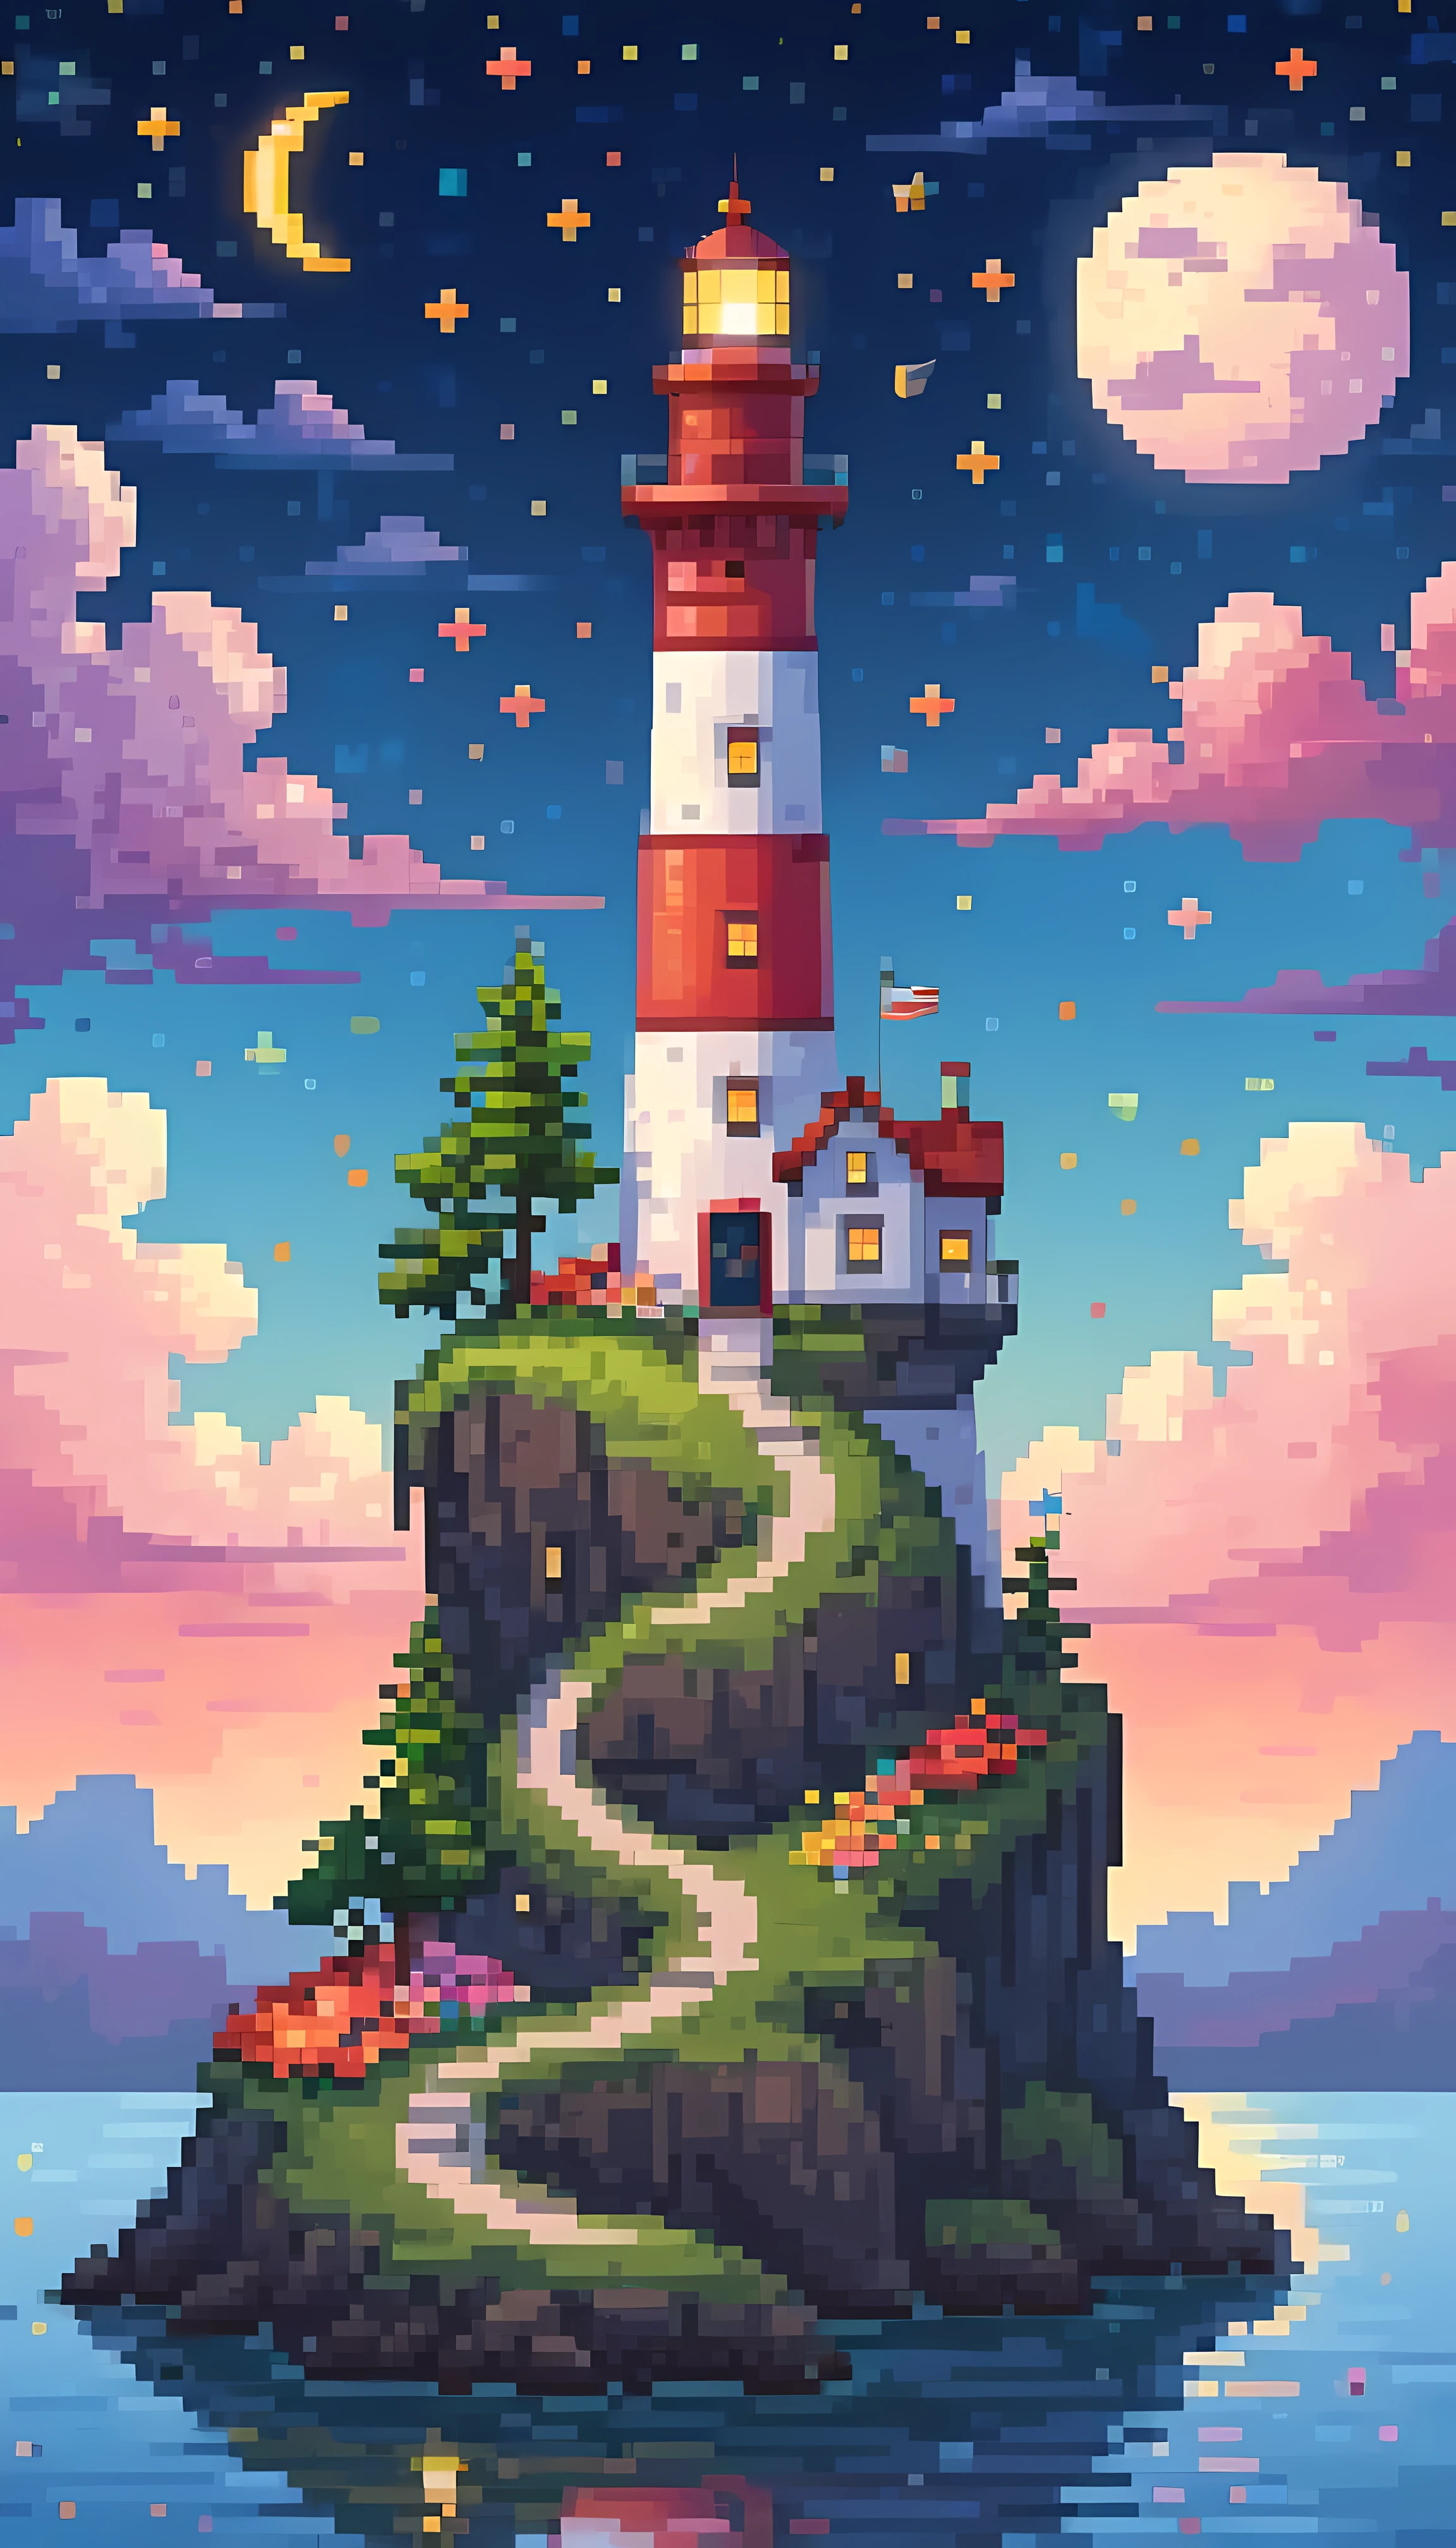 Pixel art, masterpiece in maximum 16K resolution, superb quality, a whimsical tall lighthouse on a floating big island, the lighthouse has playful design, the floating island has colorful flowers and whimsical trees, night sky with winkling stars, a shooting star, a crescent moon, dreamy color palette. | ((More_Detail))